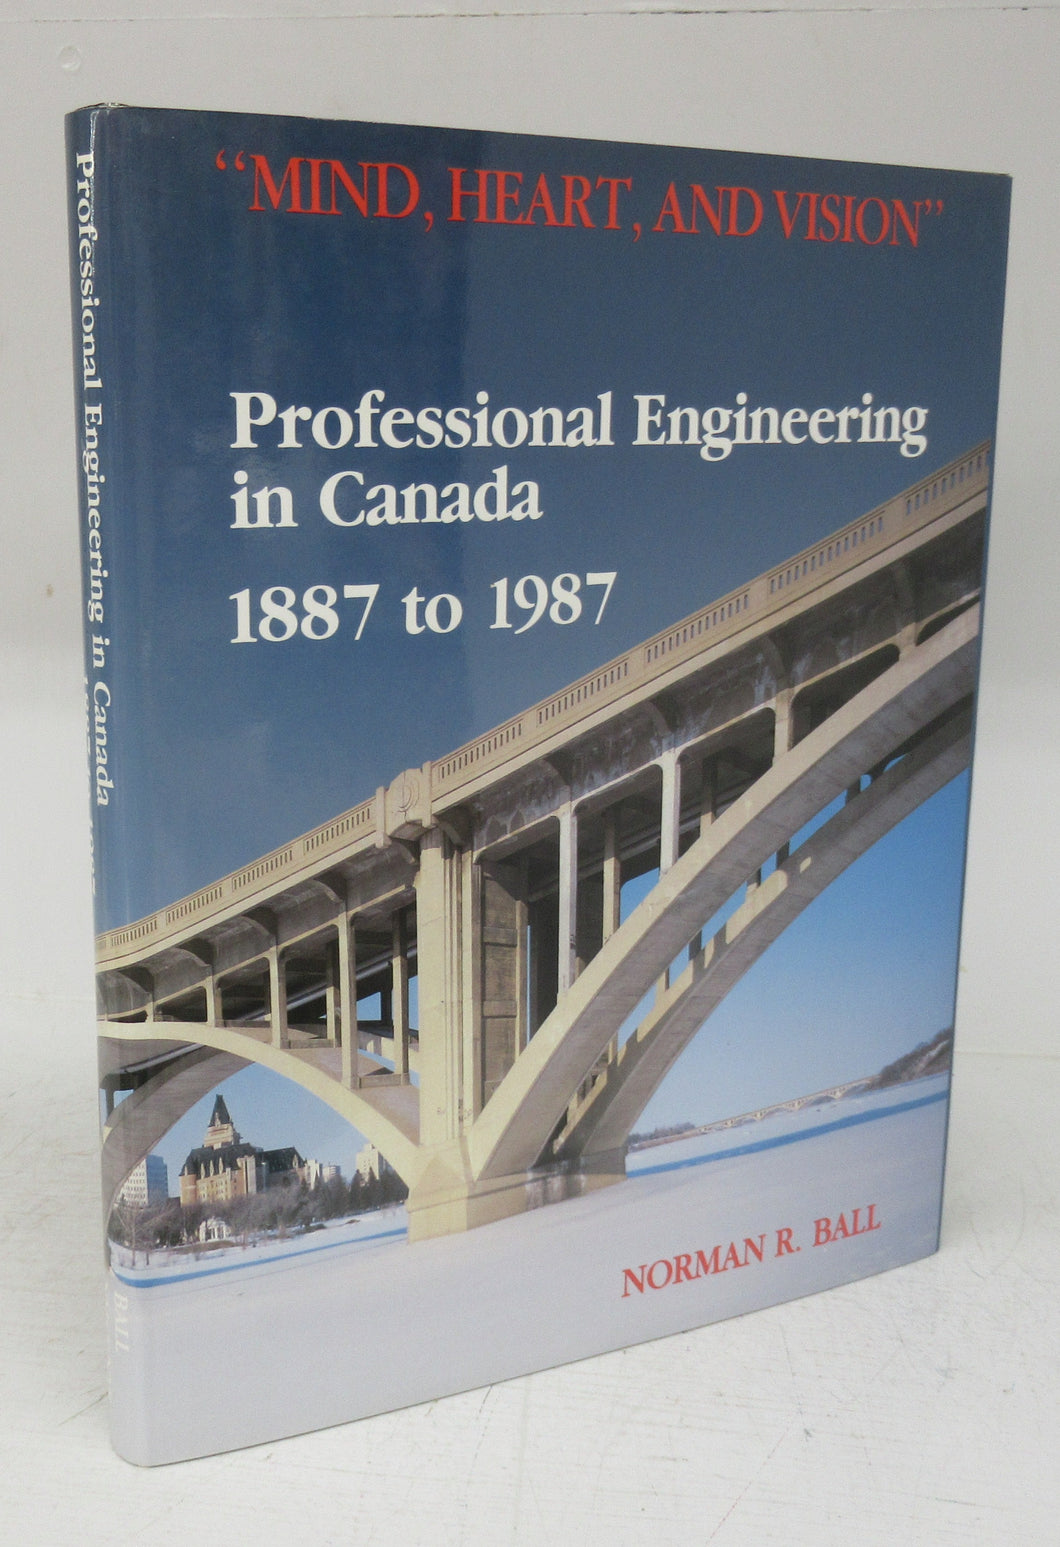 Mind, Heart, and Vision: Professional Engineering in Canada 1887 to 1987